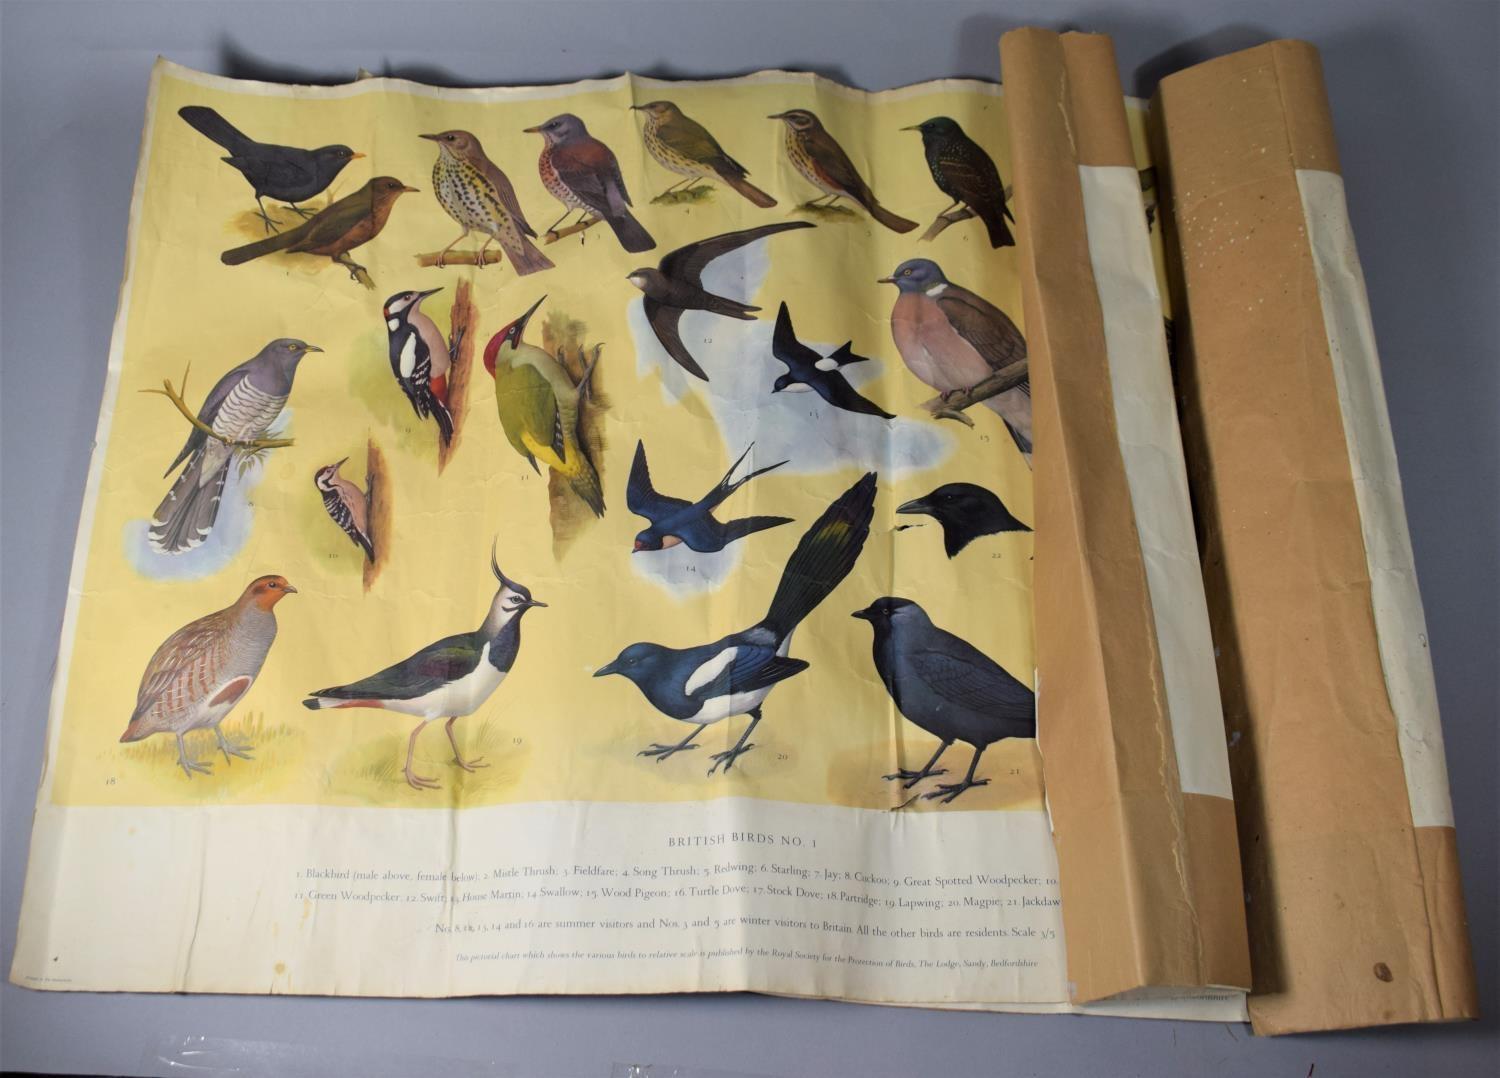 Two Vintage Pictorial Charts, 'British Birds' No. 1 & 2, by H.J. Slyper 1960, Published by the Royal